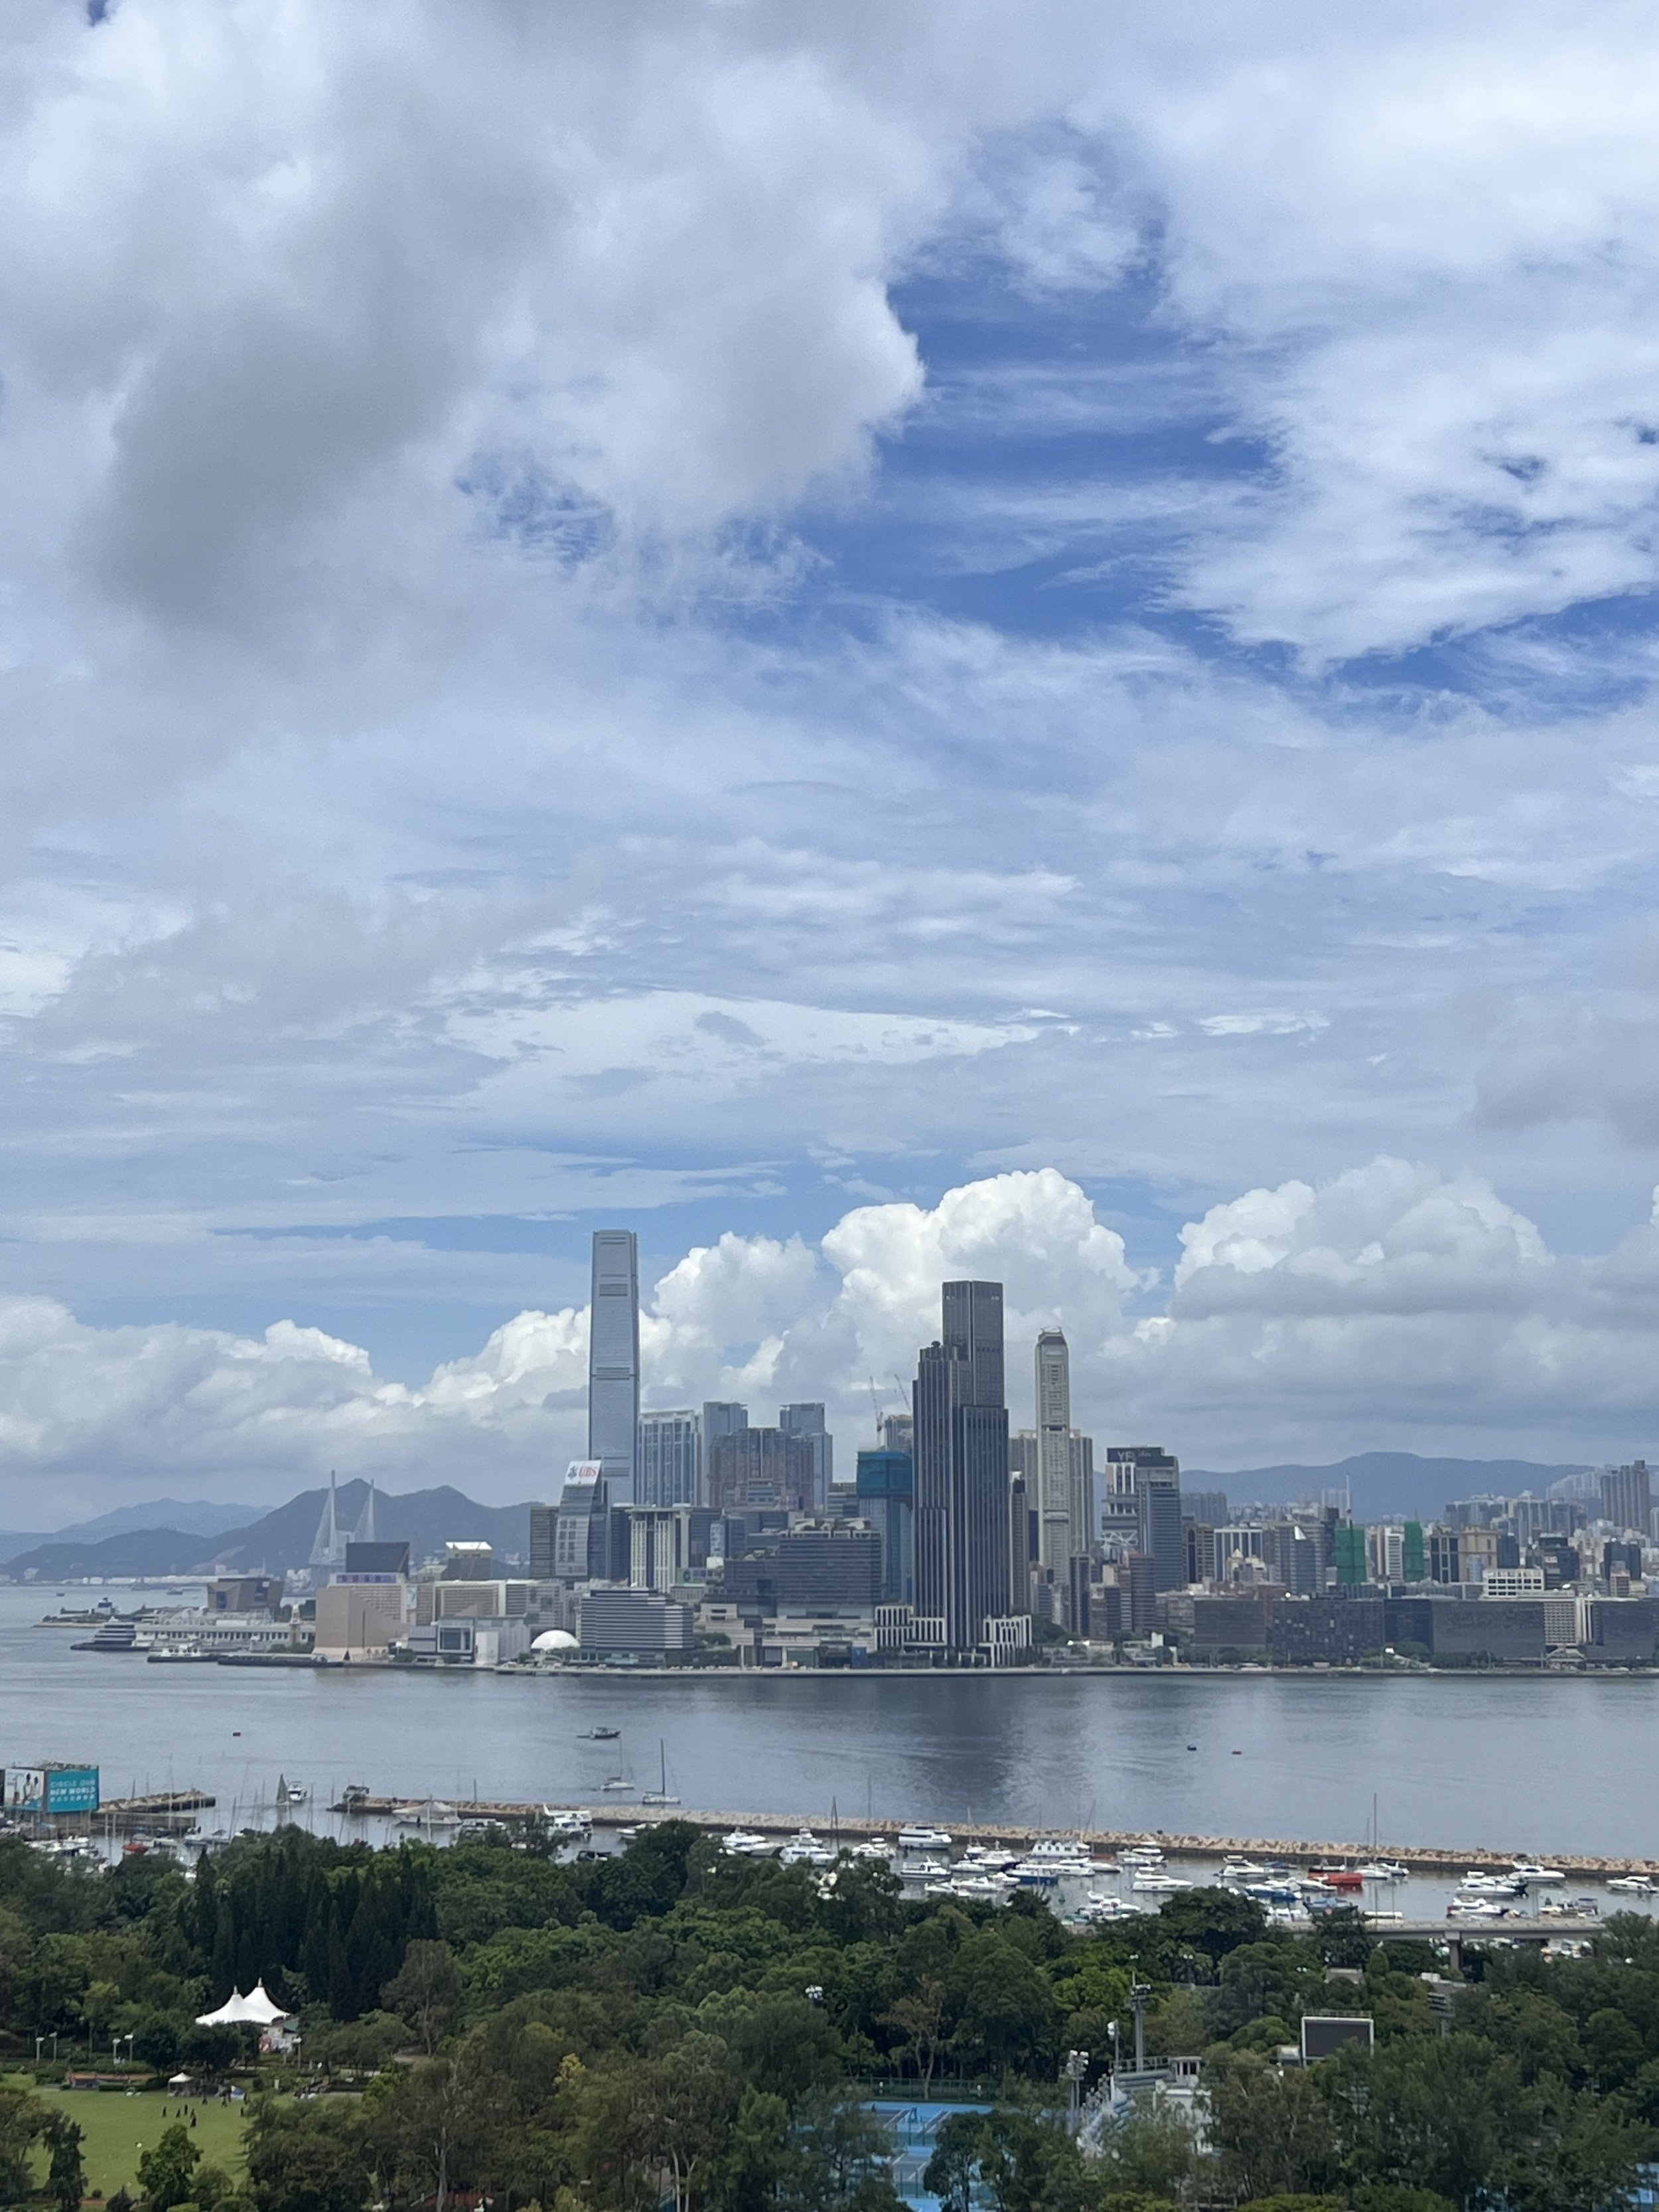 Little Tai Hang Hotel Review